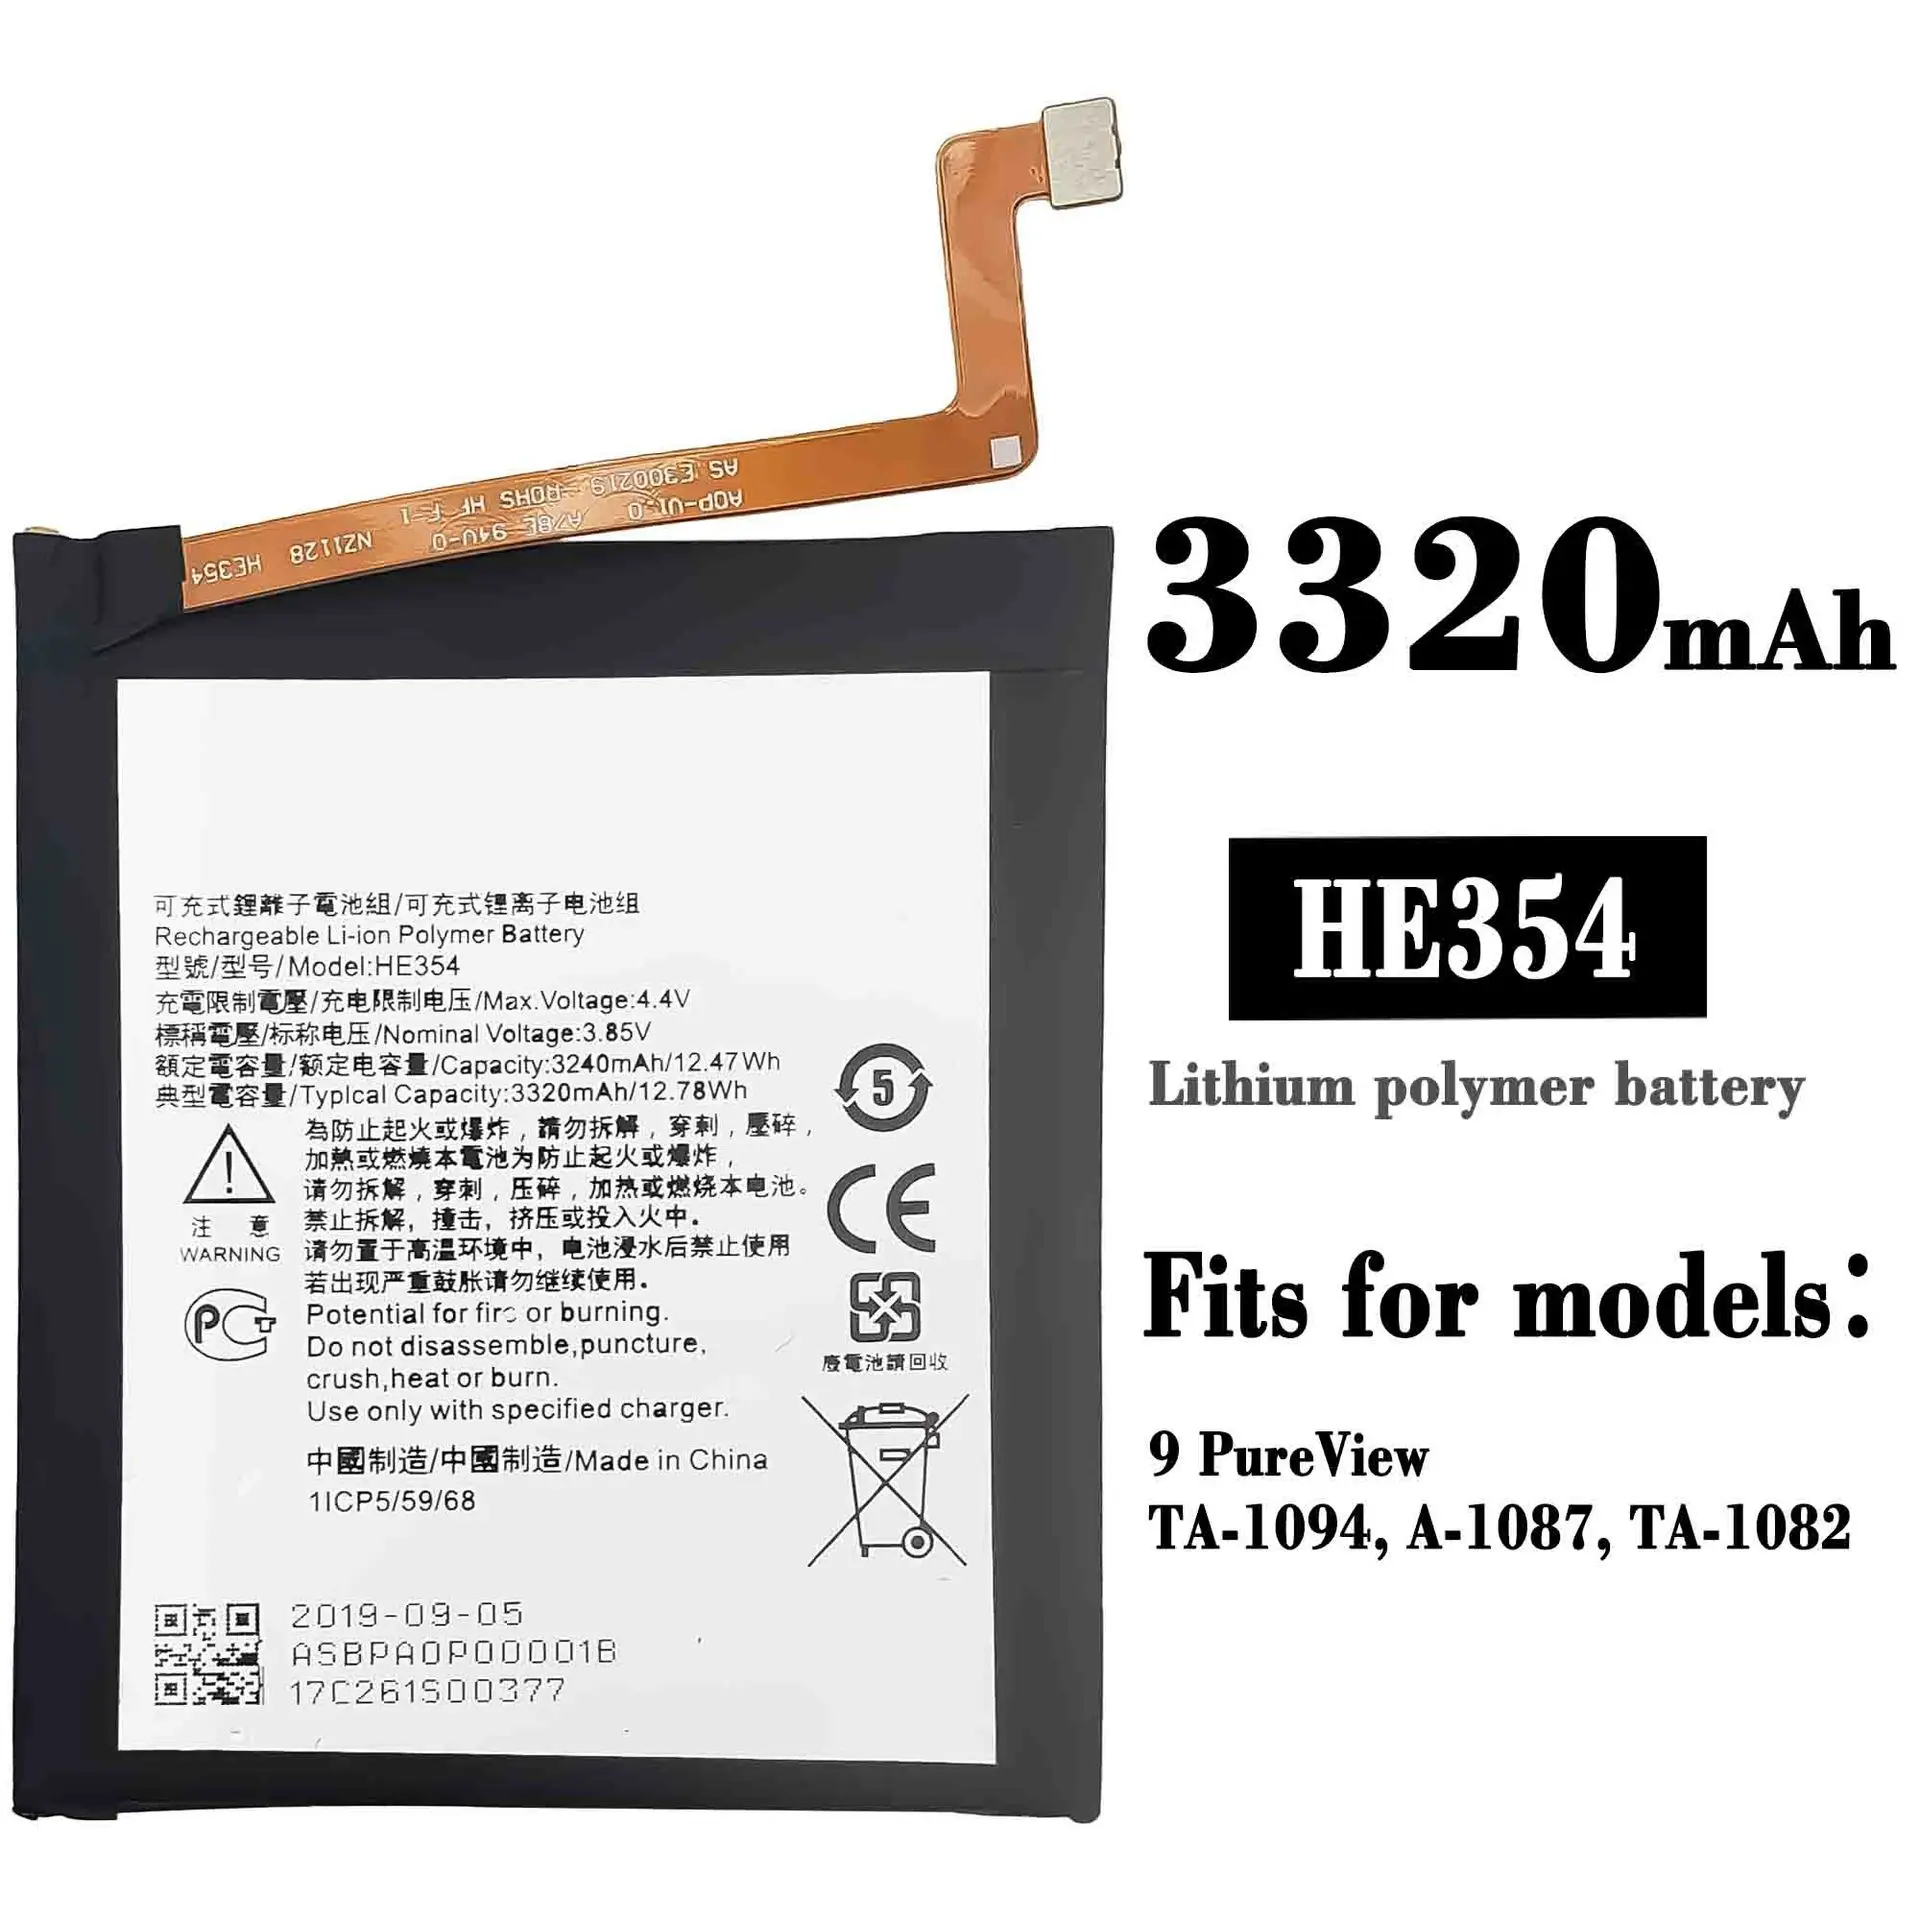 

HE354 100% Orginal High Quality 3320mAh Replacement Battery For Nokia 9 PureView TA-1094-1087-1082 Mobile Phone New Batteries